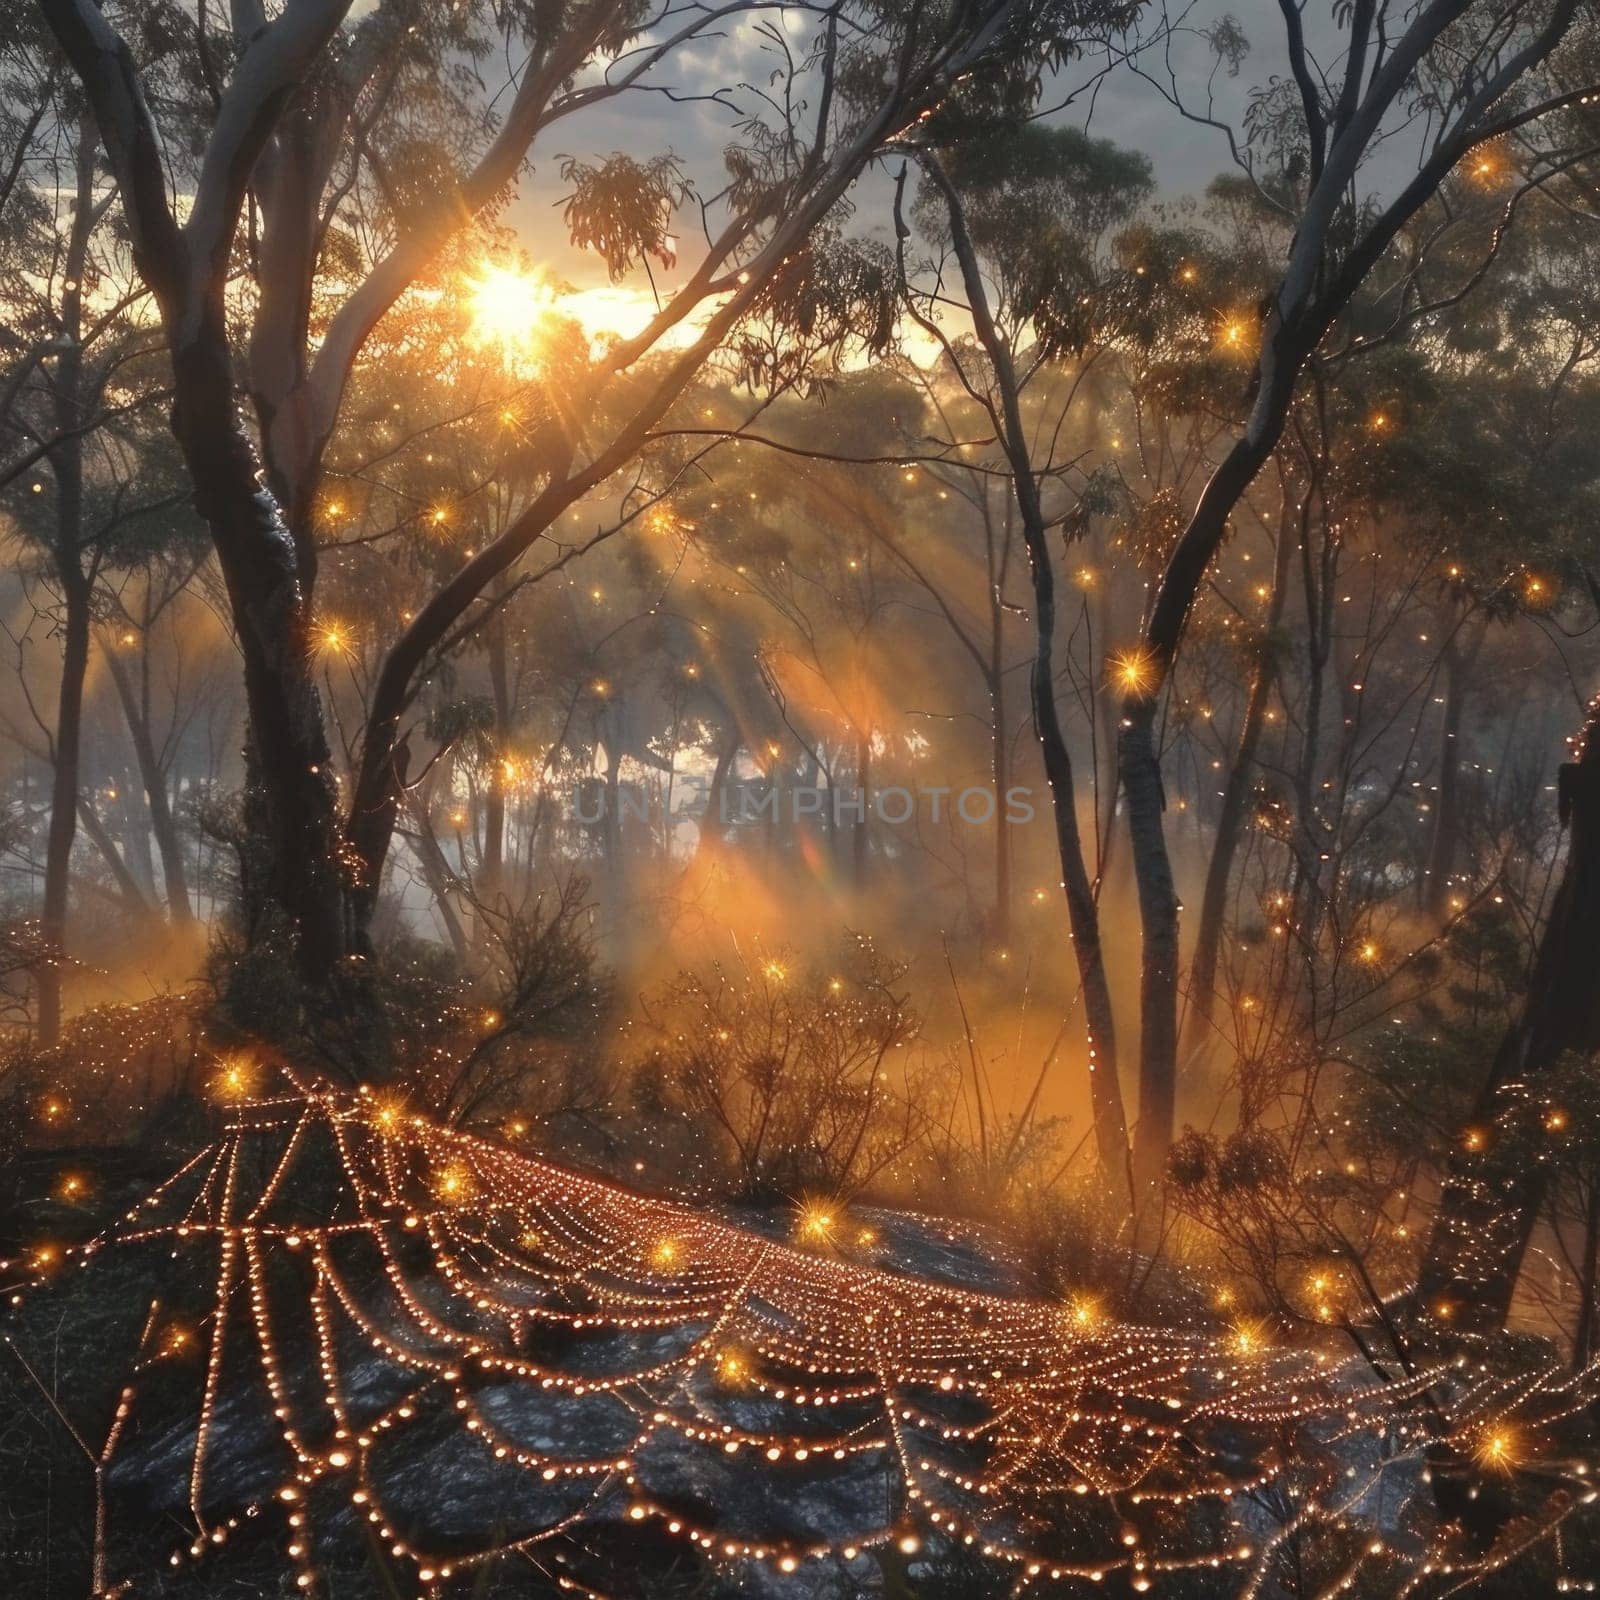 A large spider web intricately woven in the middle of a forest, catching the sunlight filtering through the trees.